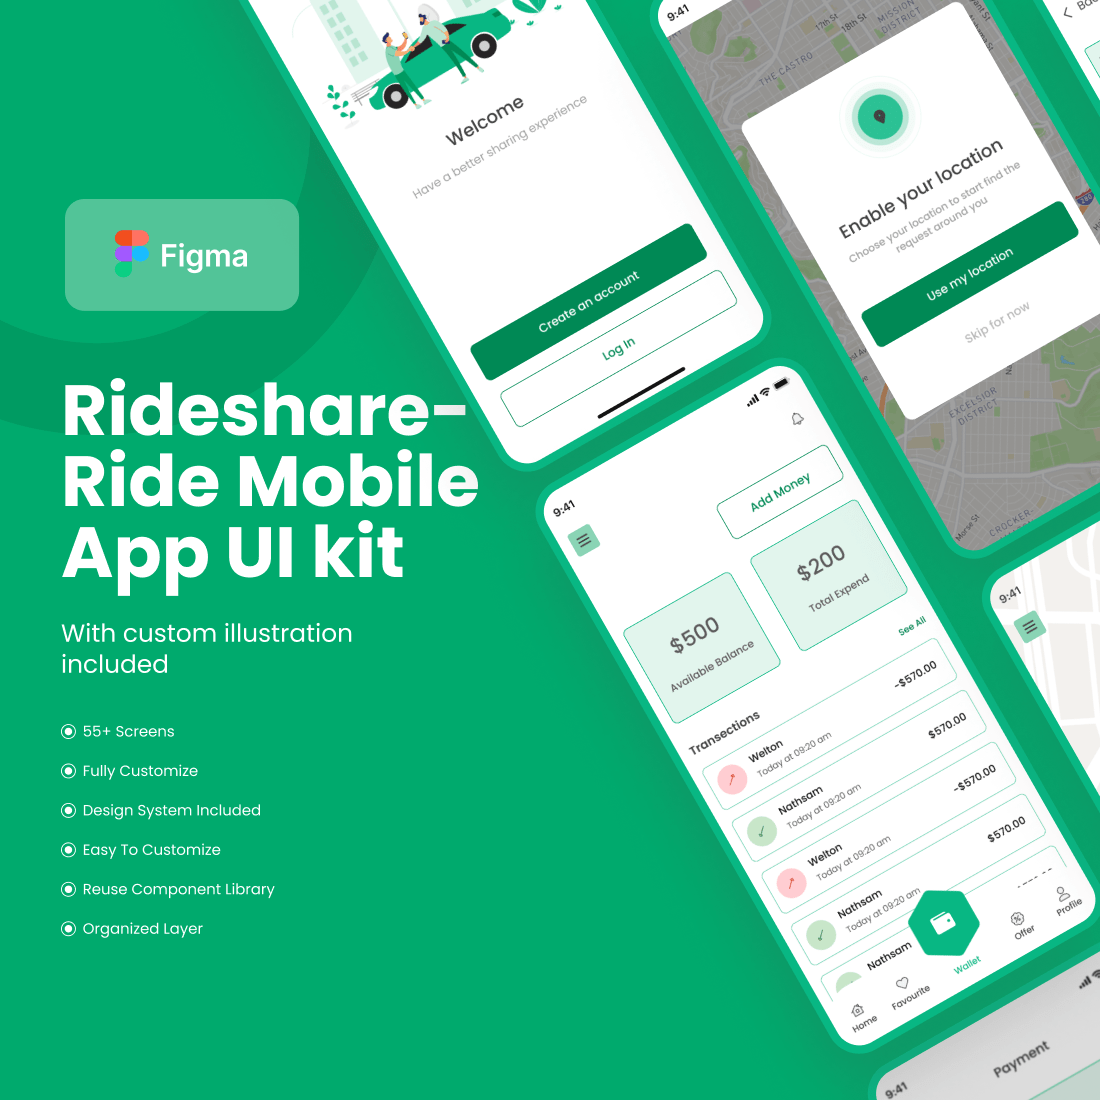 Rideshare Ride Mobile App UI kit preview image.